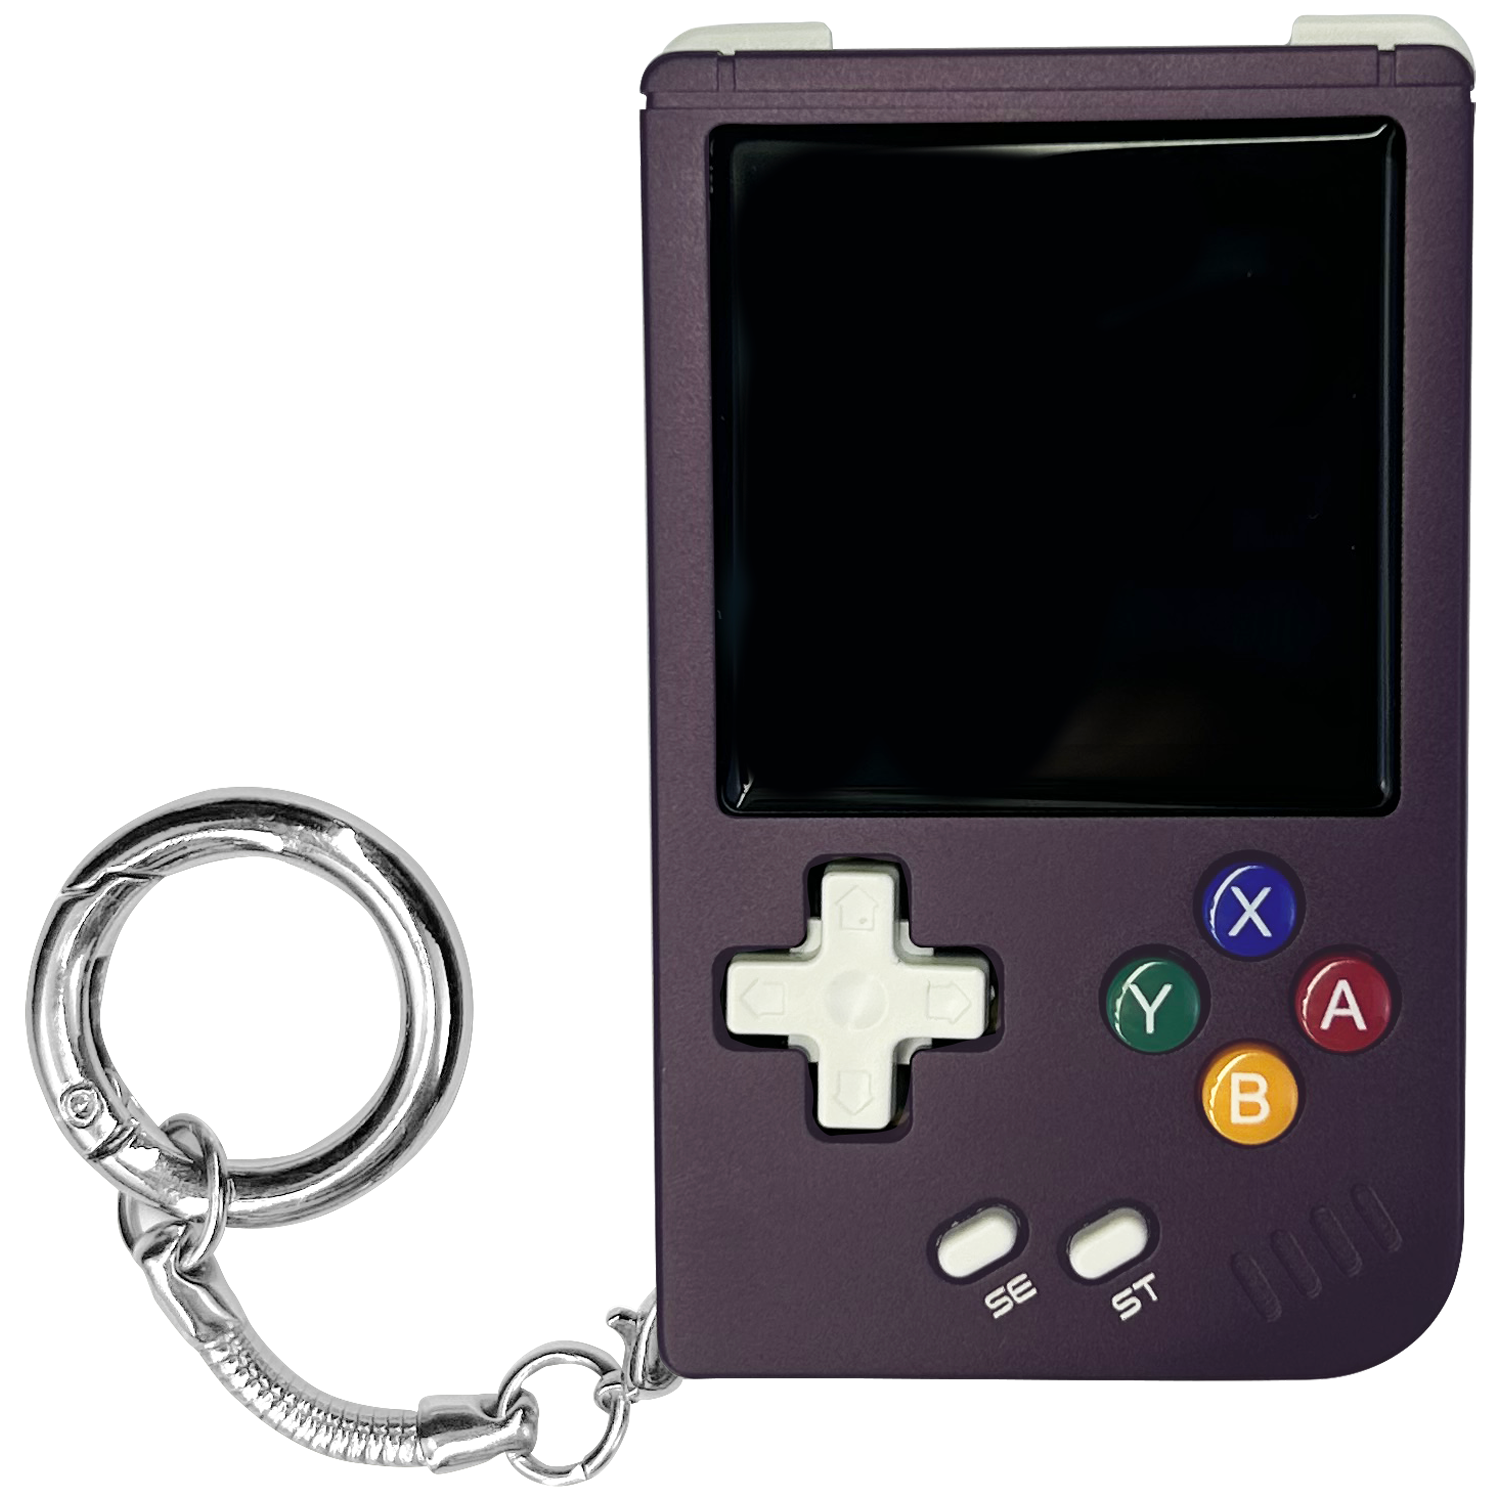 Portable Game Console ANBERNIC RG Nano for sale in London 